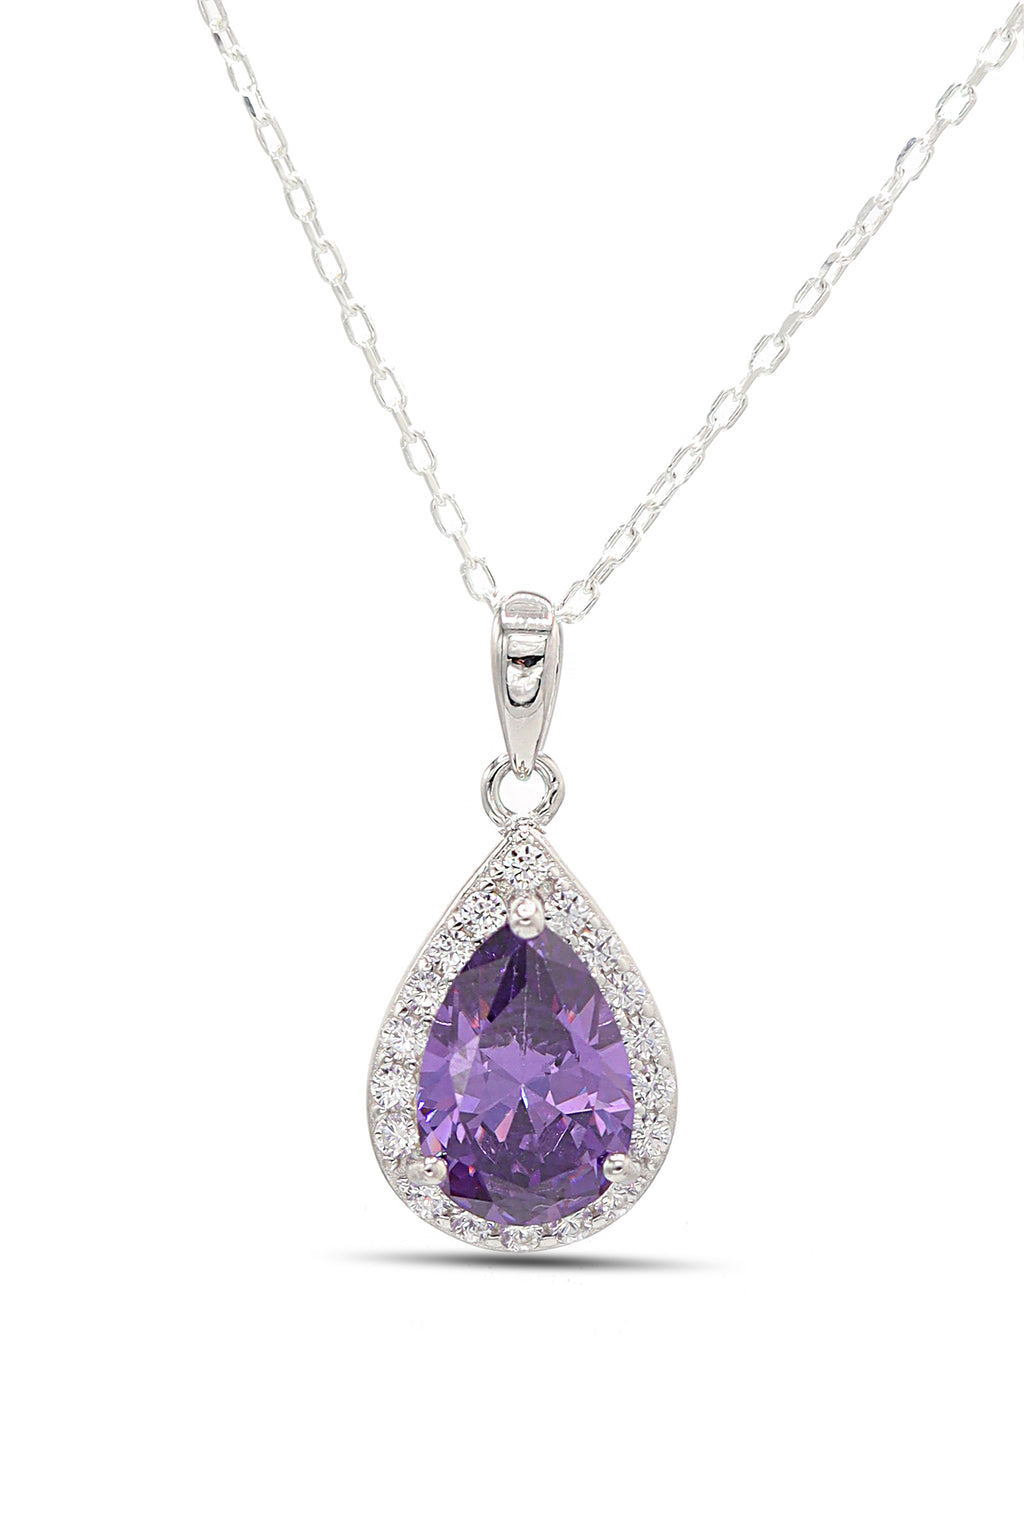 Drop Model Silver Necklace With Amethyst and Zircon (NG201021896)